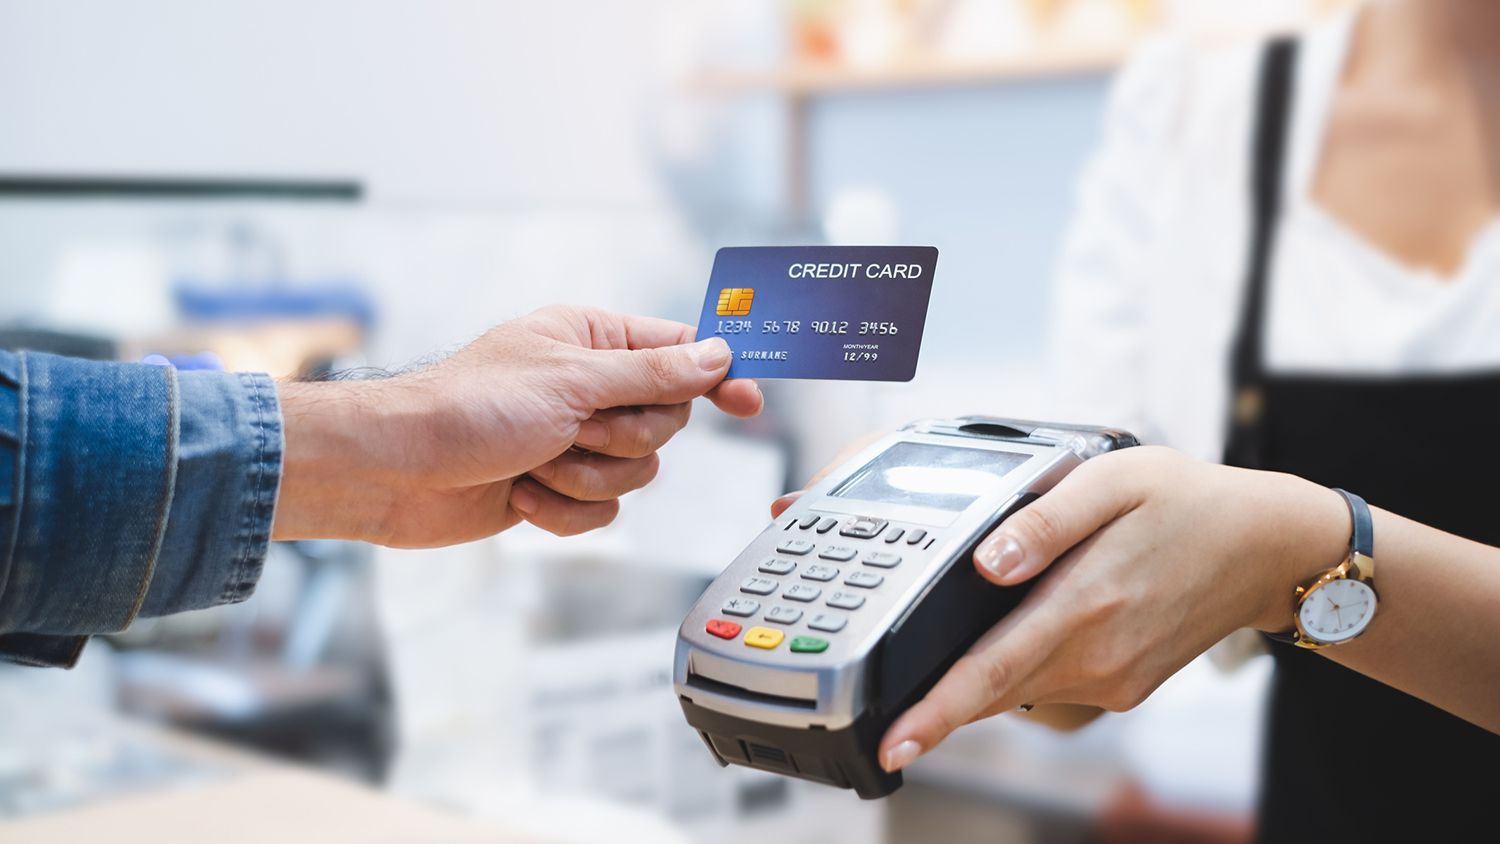 What is better for shopping online: e-wallet payment or card payment?